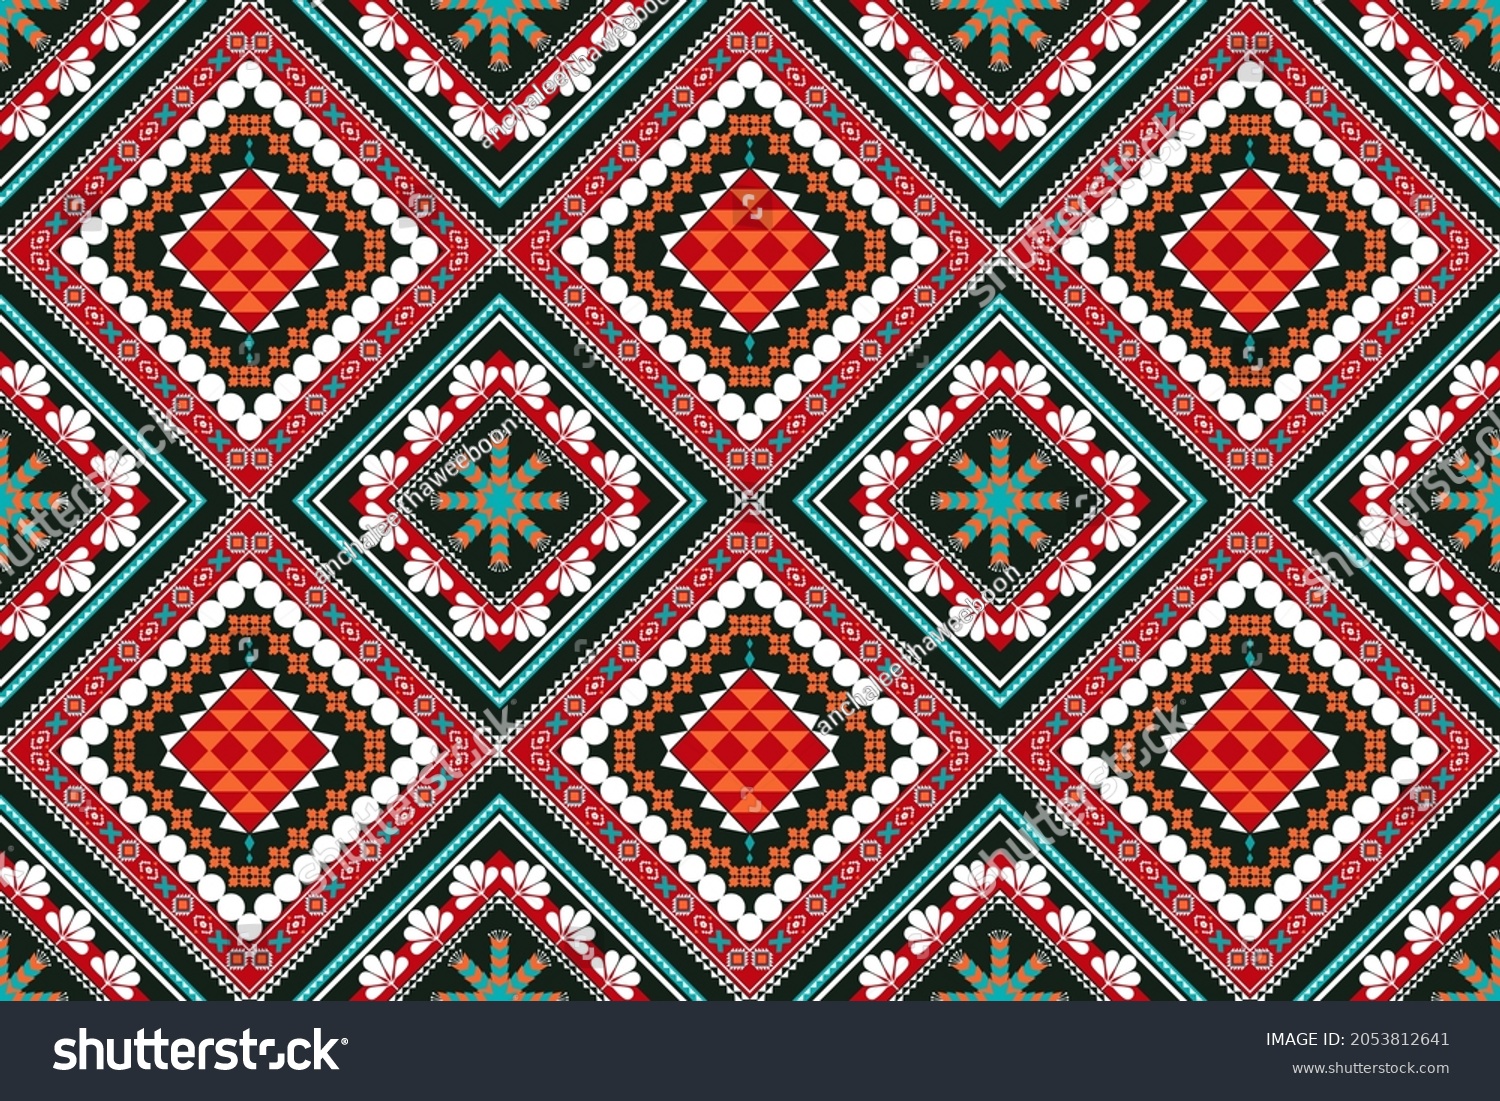 SVG of Geometric ethnic oriental pattern traditional.ancient art arabesque on black background.Aztec style beautiful embroidery abstract vector.design for texture,fabric,clothing,wrapping,decoration,carpet. svg